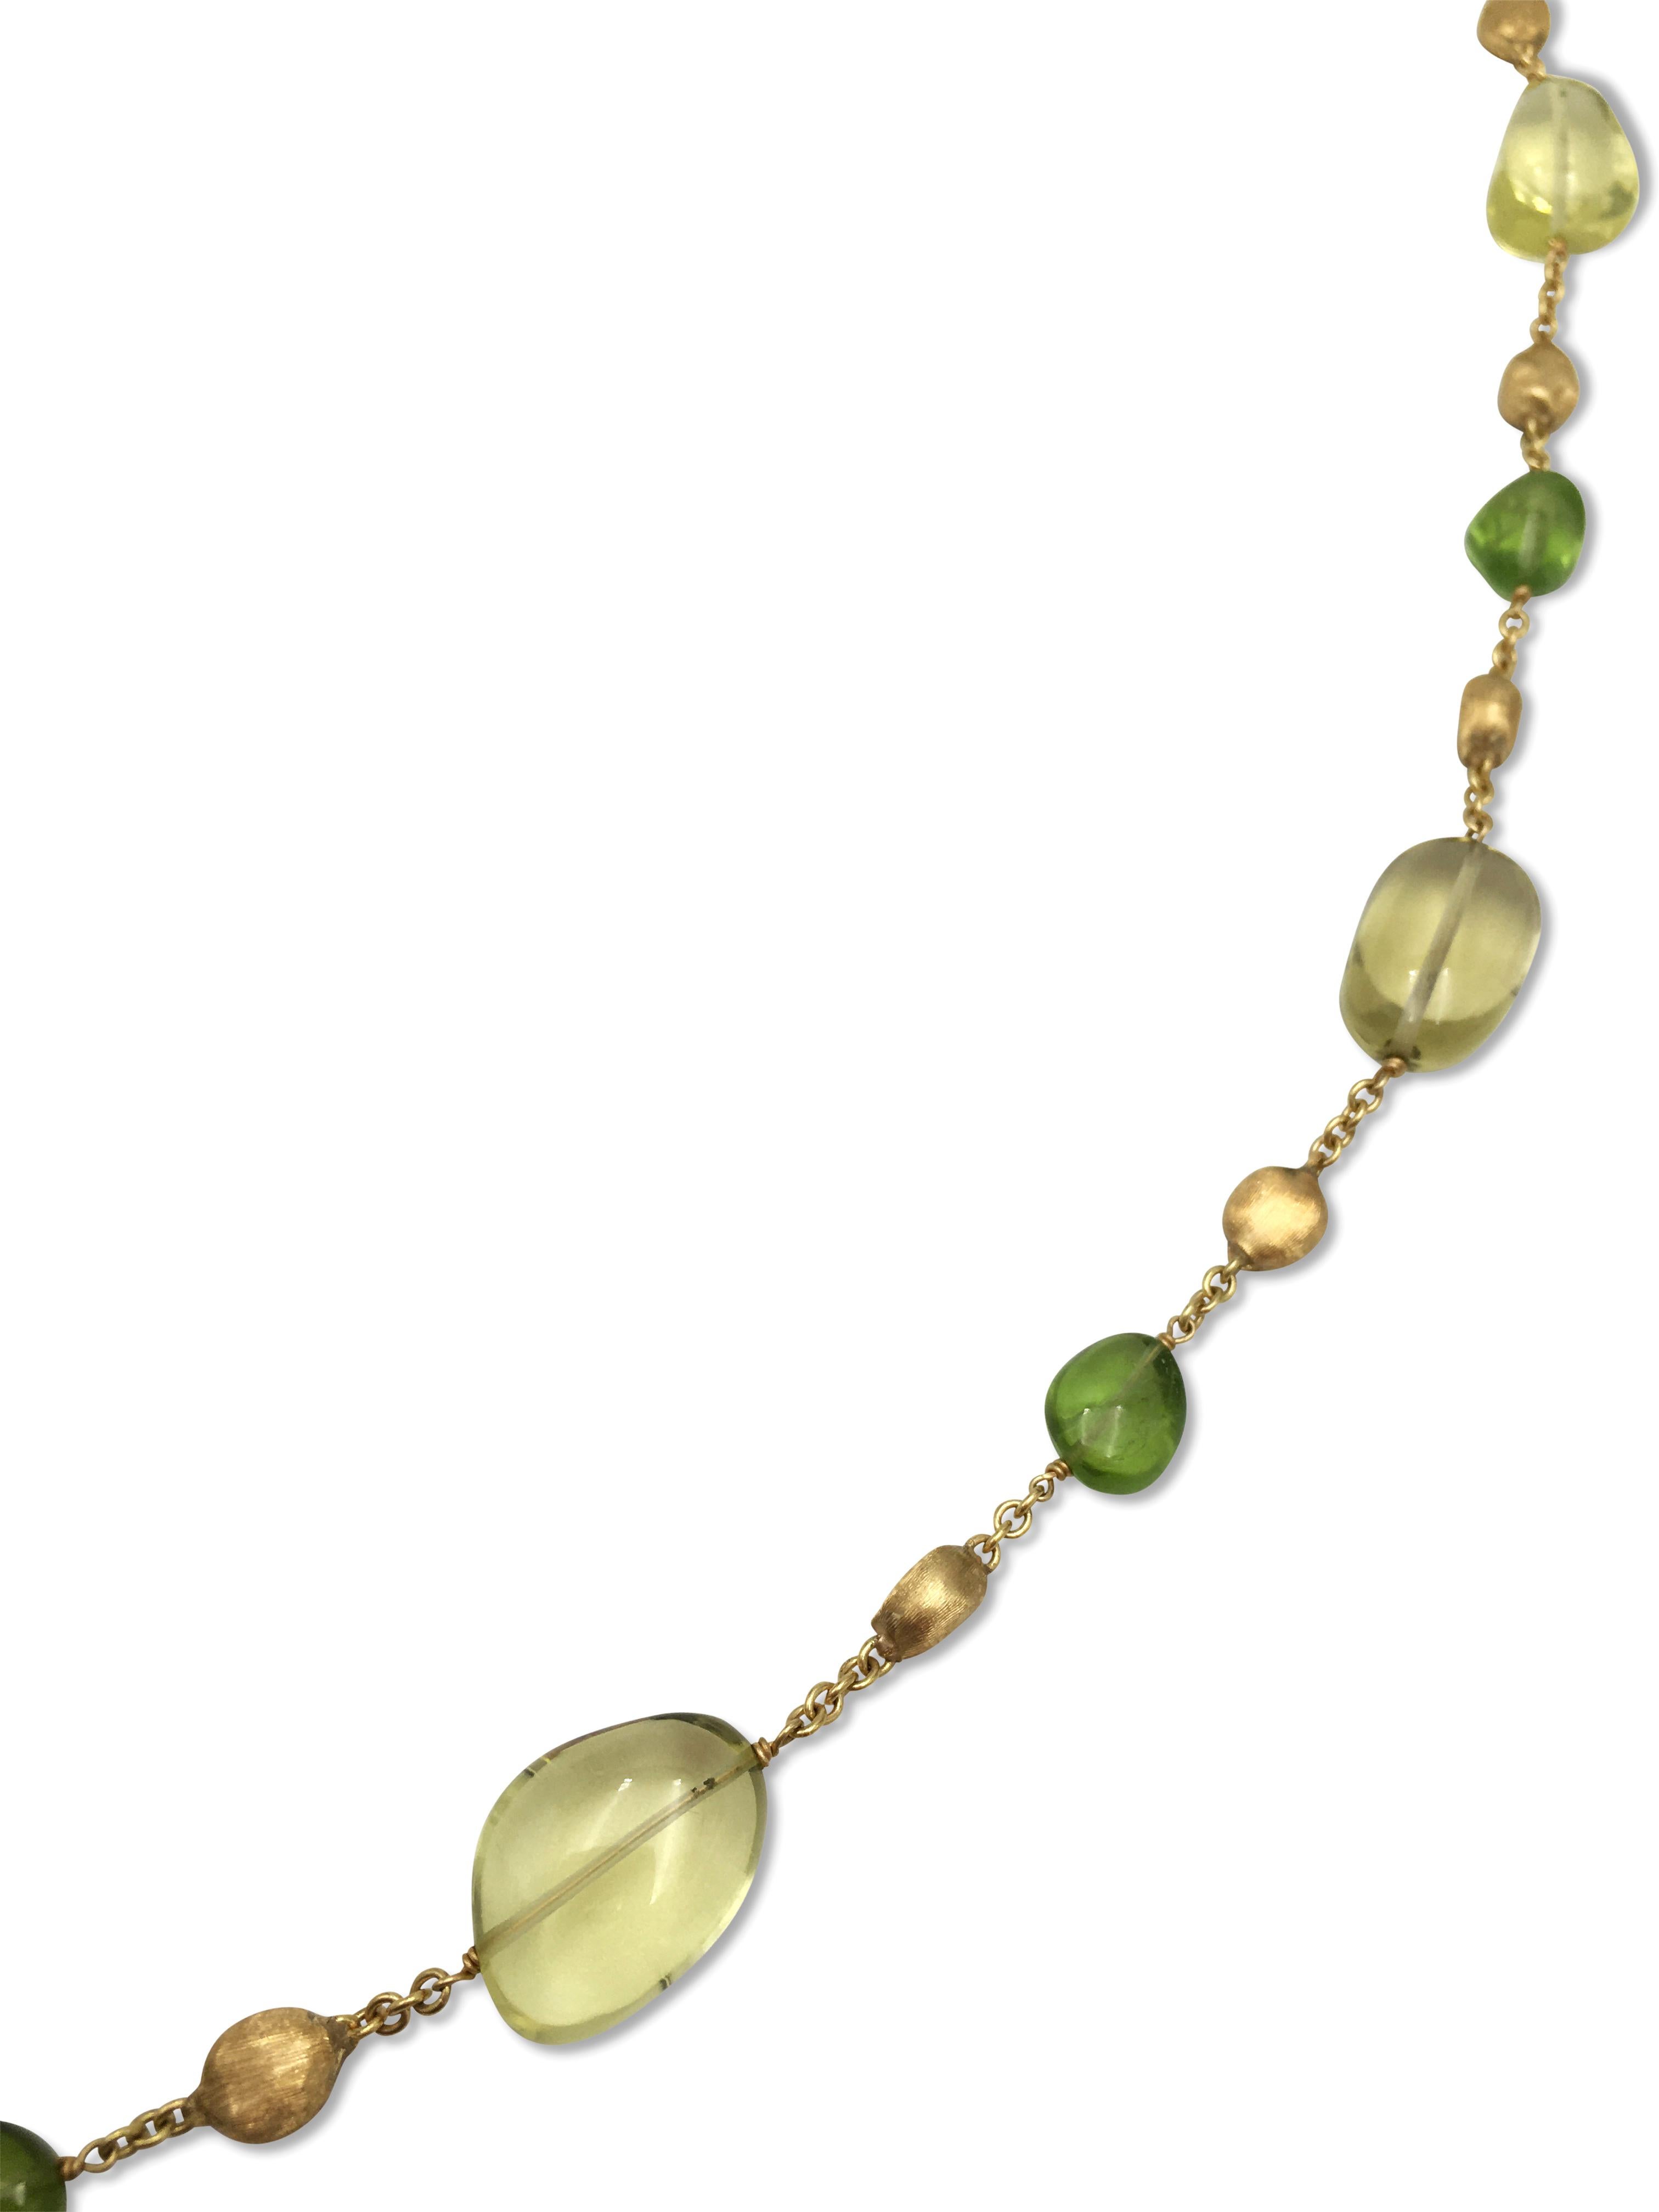 Authentic Marco Bicego necklace made in 18 karat yellow gold with citrine and peridot beads.  The necklace is 15 inches in length.  CIRCA 2010's